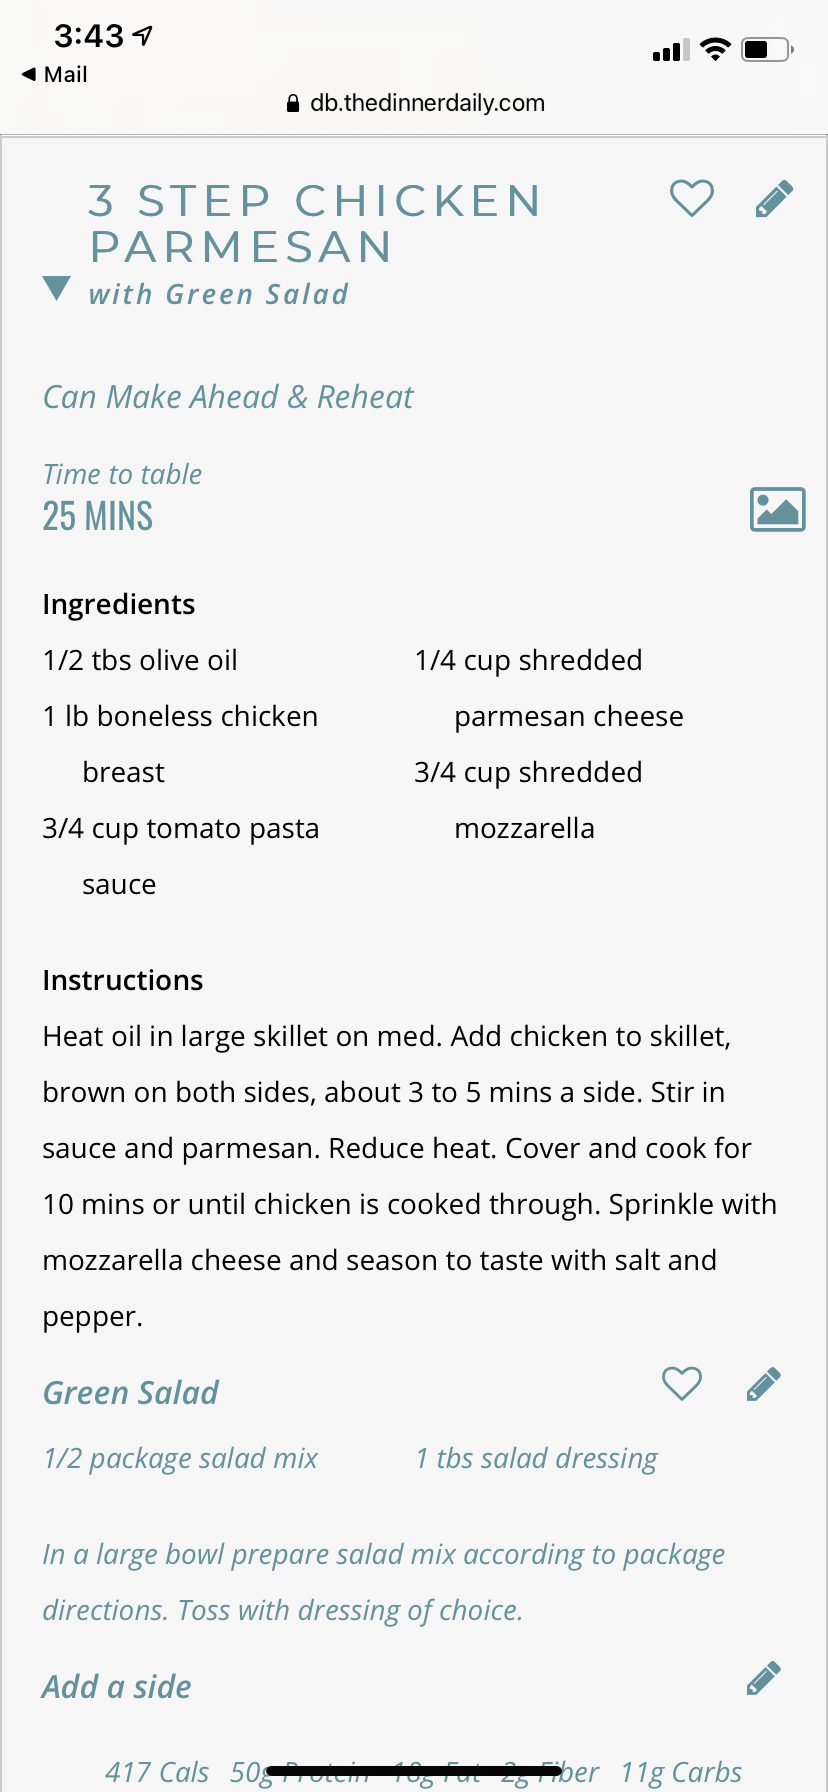 The Dinner Daily recipe